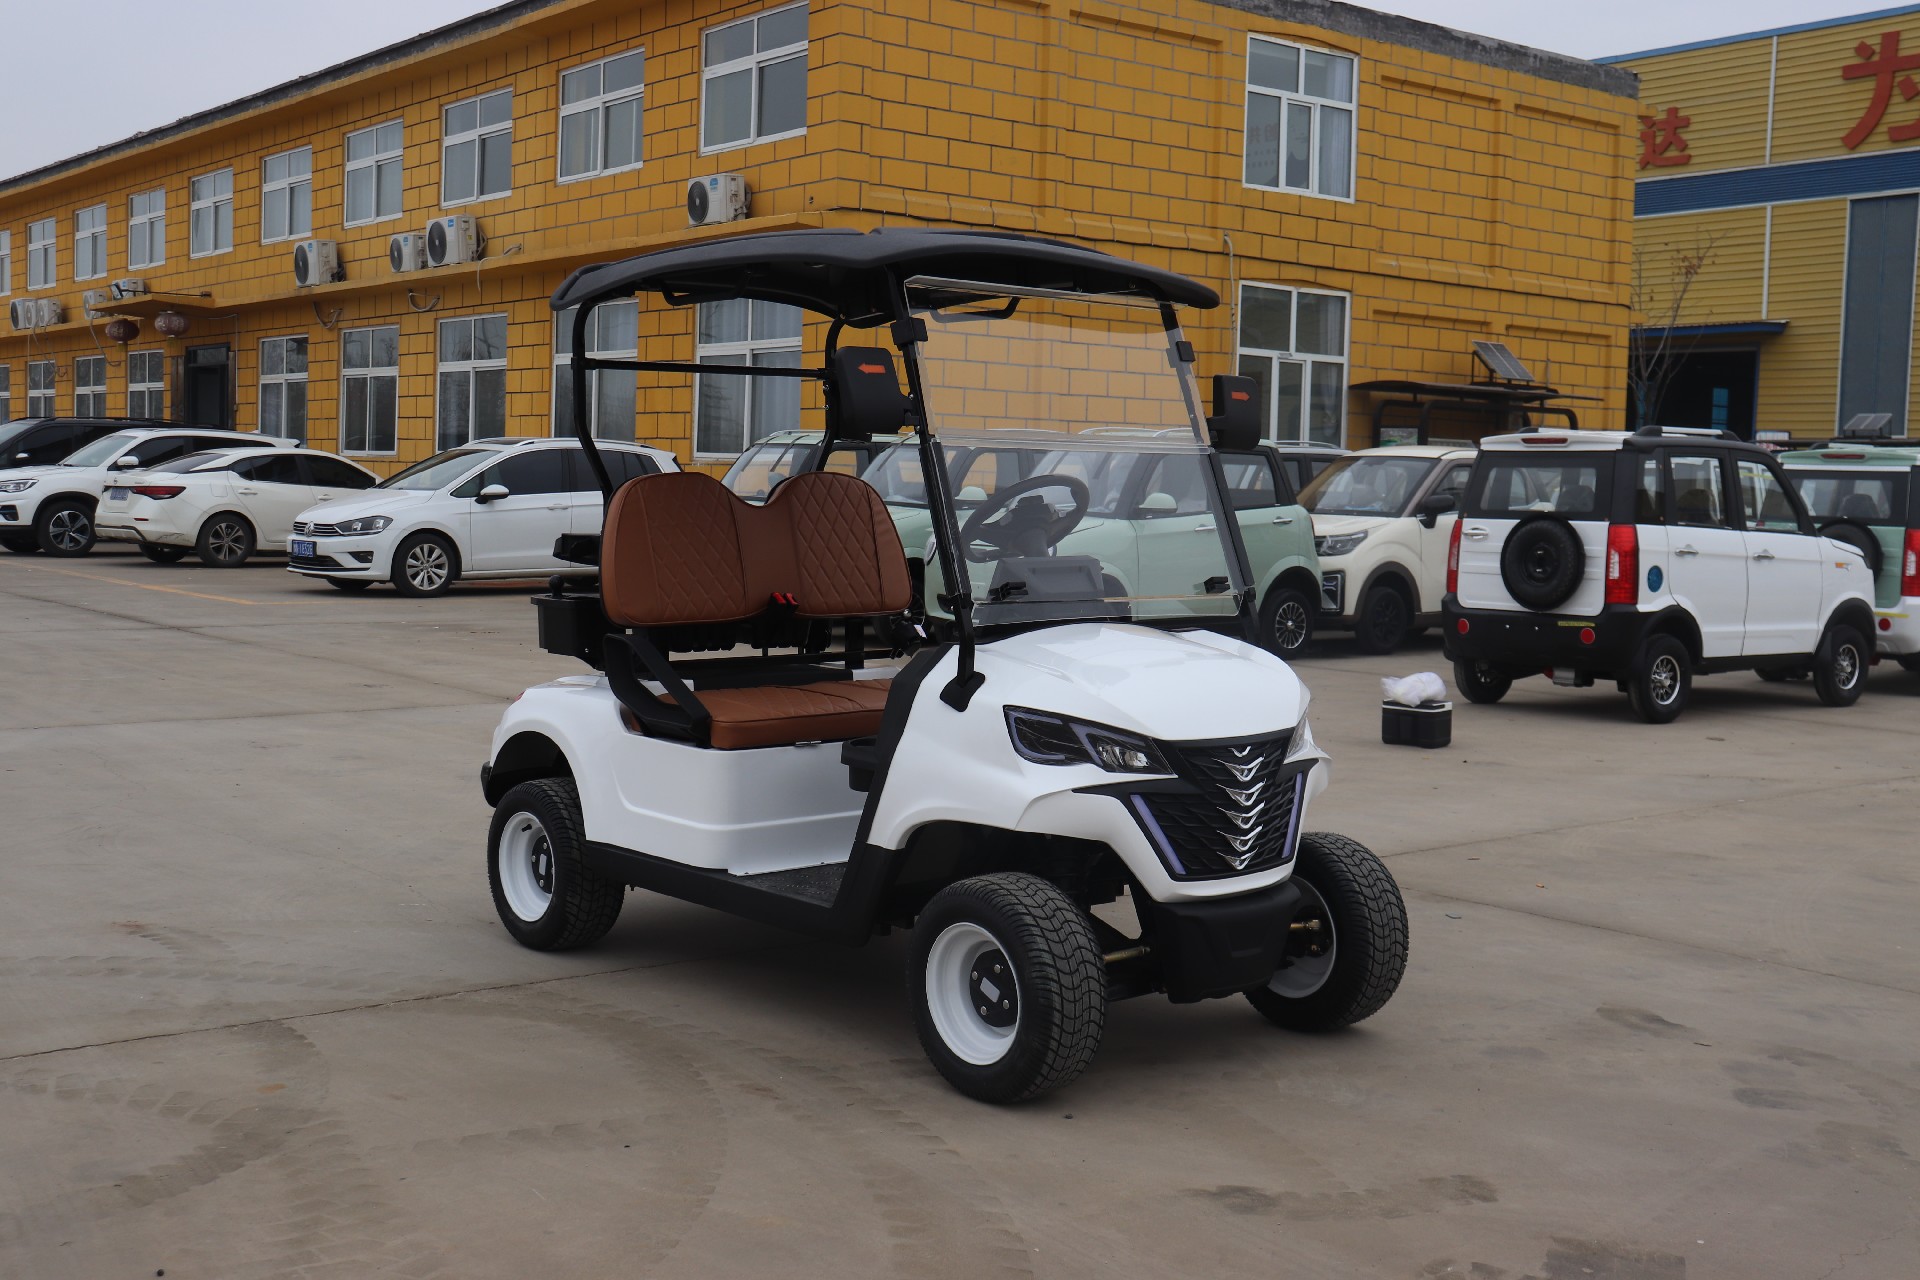 KEYU High End Golf Cart Electric Infinitely Variable Speed System Electric Golf Buggy For Two People